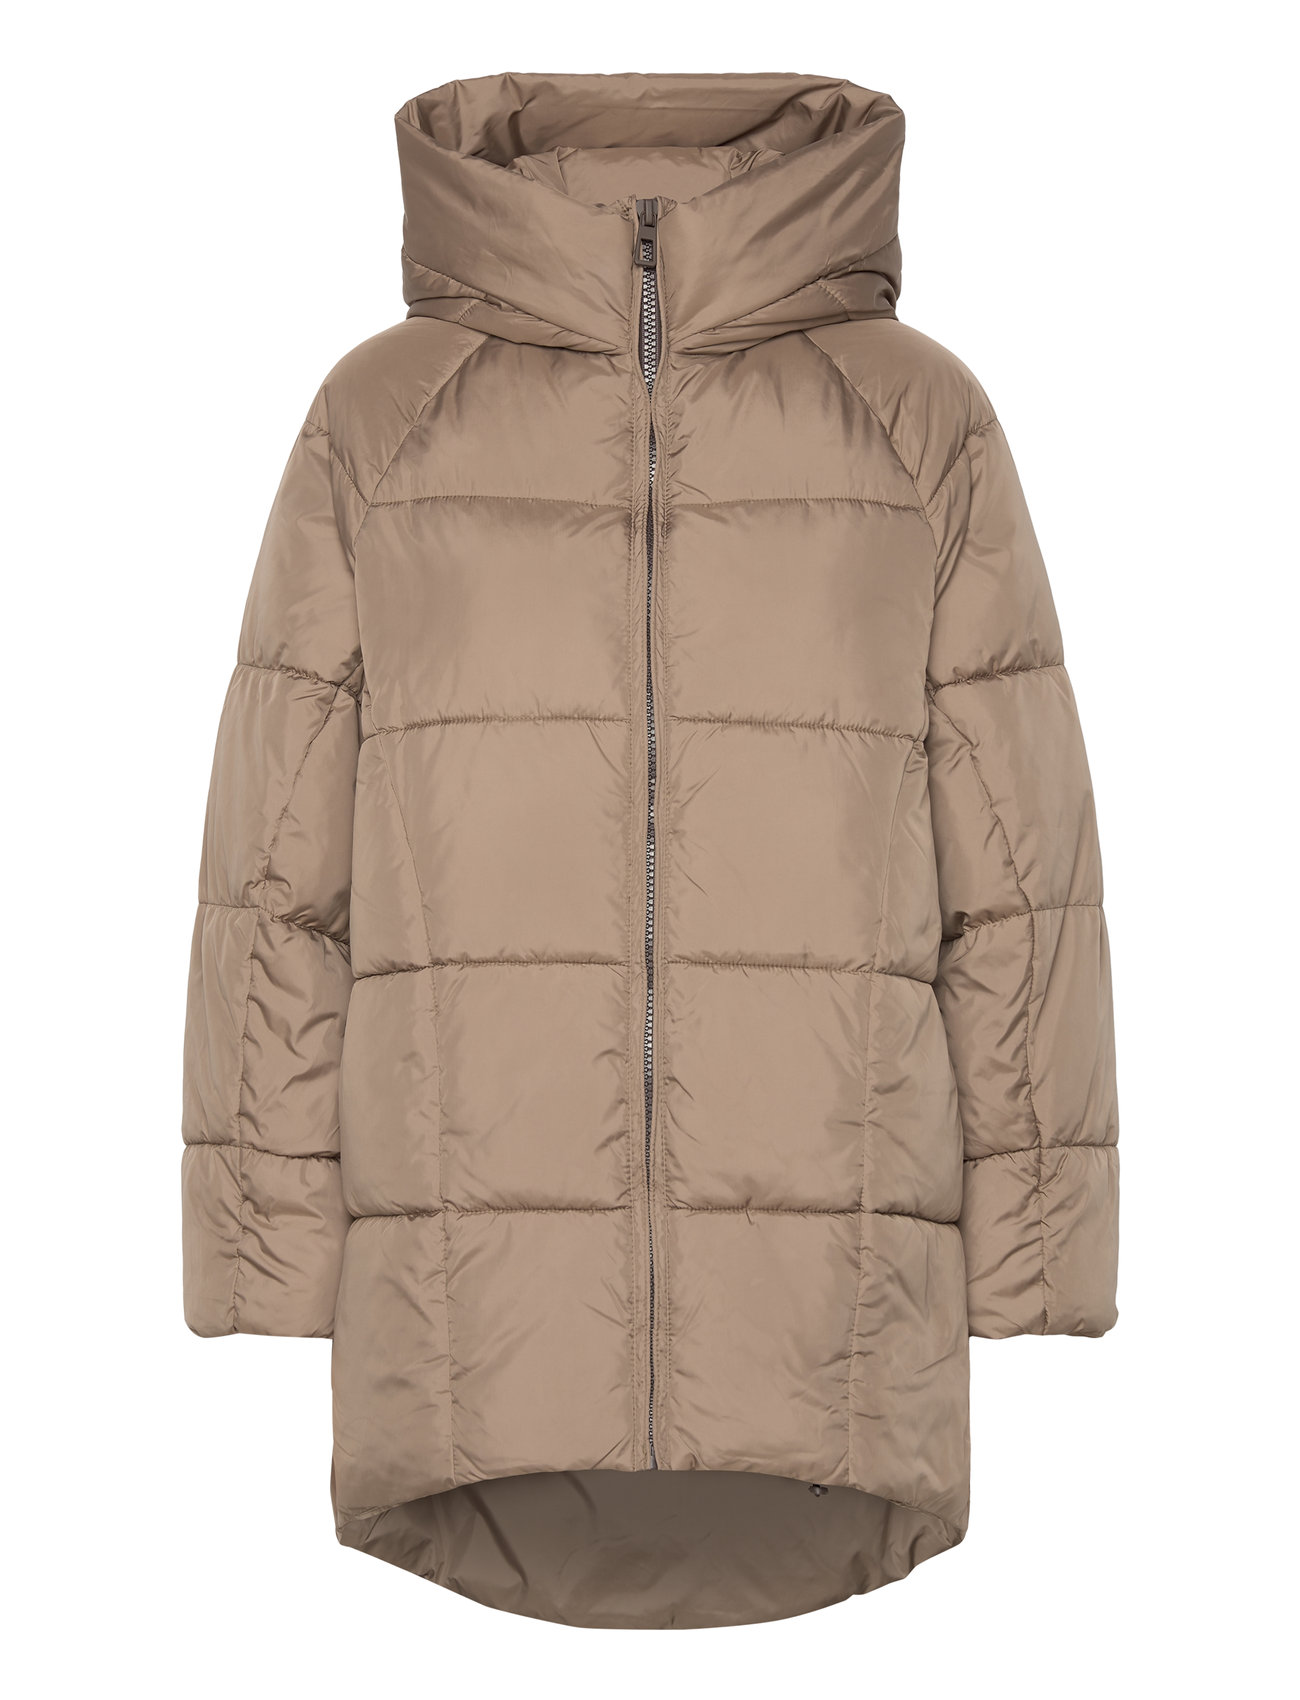 ONLY Onlasta Oversized Puffer Coat Cc Otw - 40.00 €. Buy Padded Coats from  ONLY online at Boozt.com. Fast delivery and easy returns